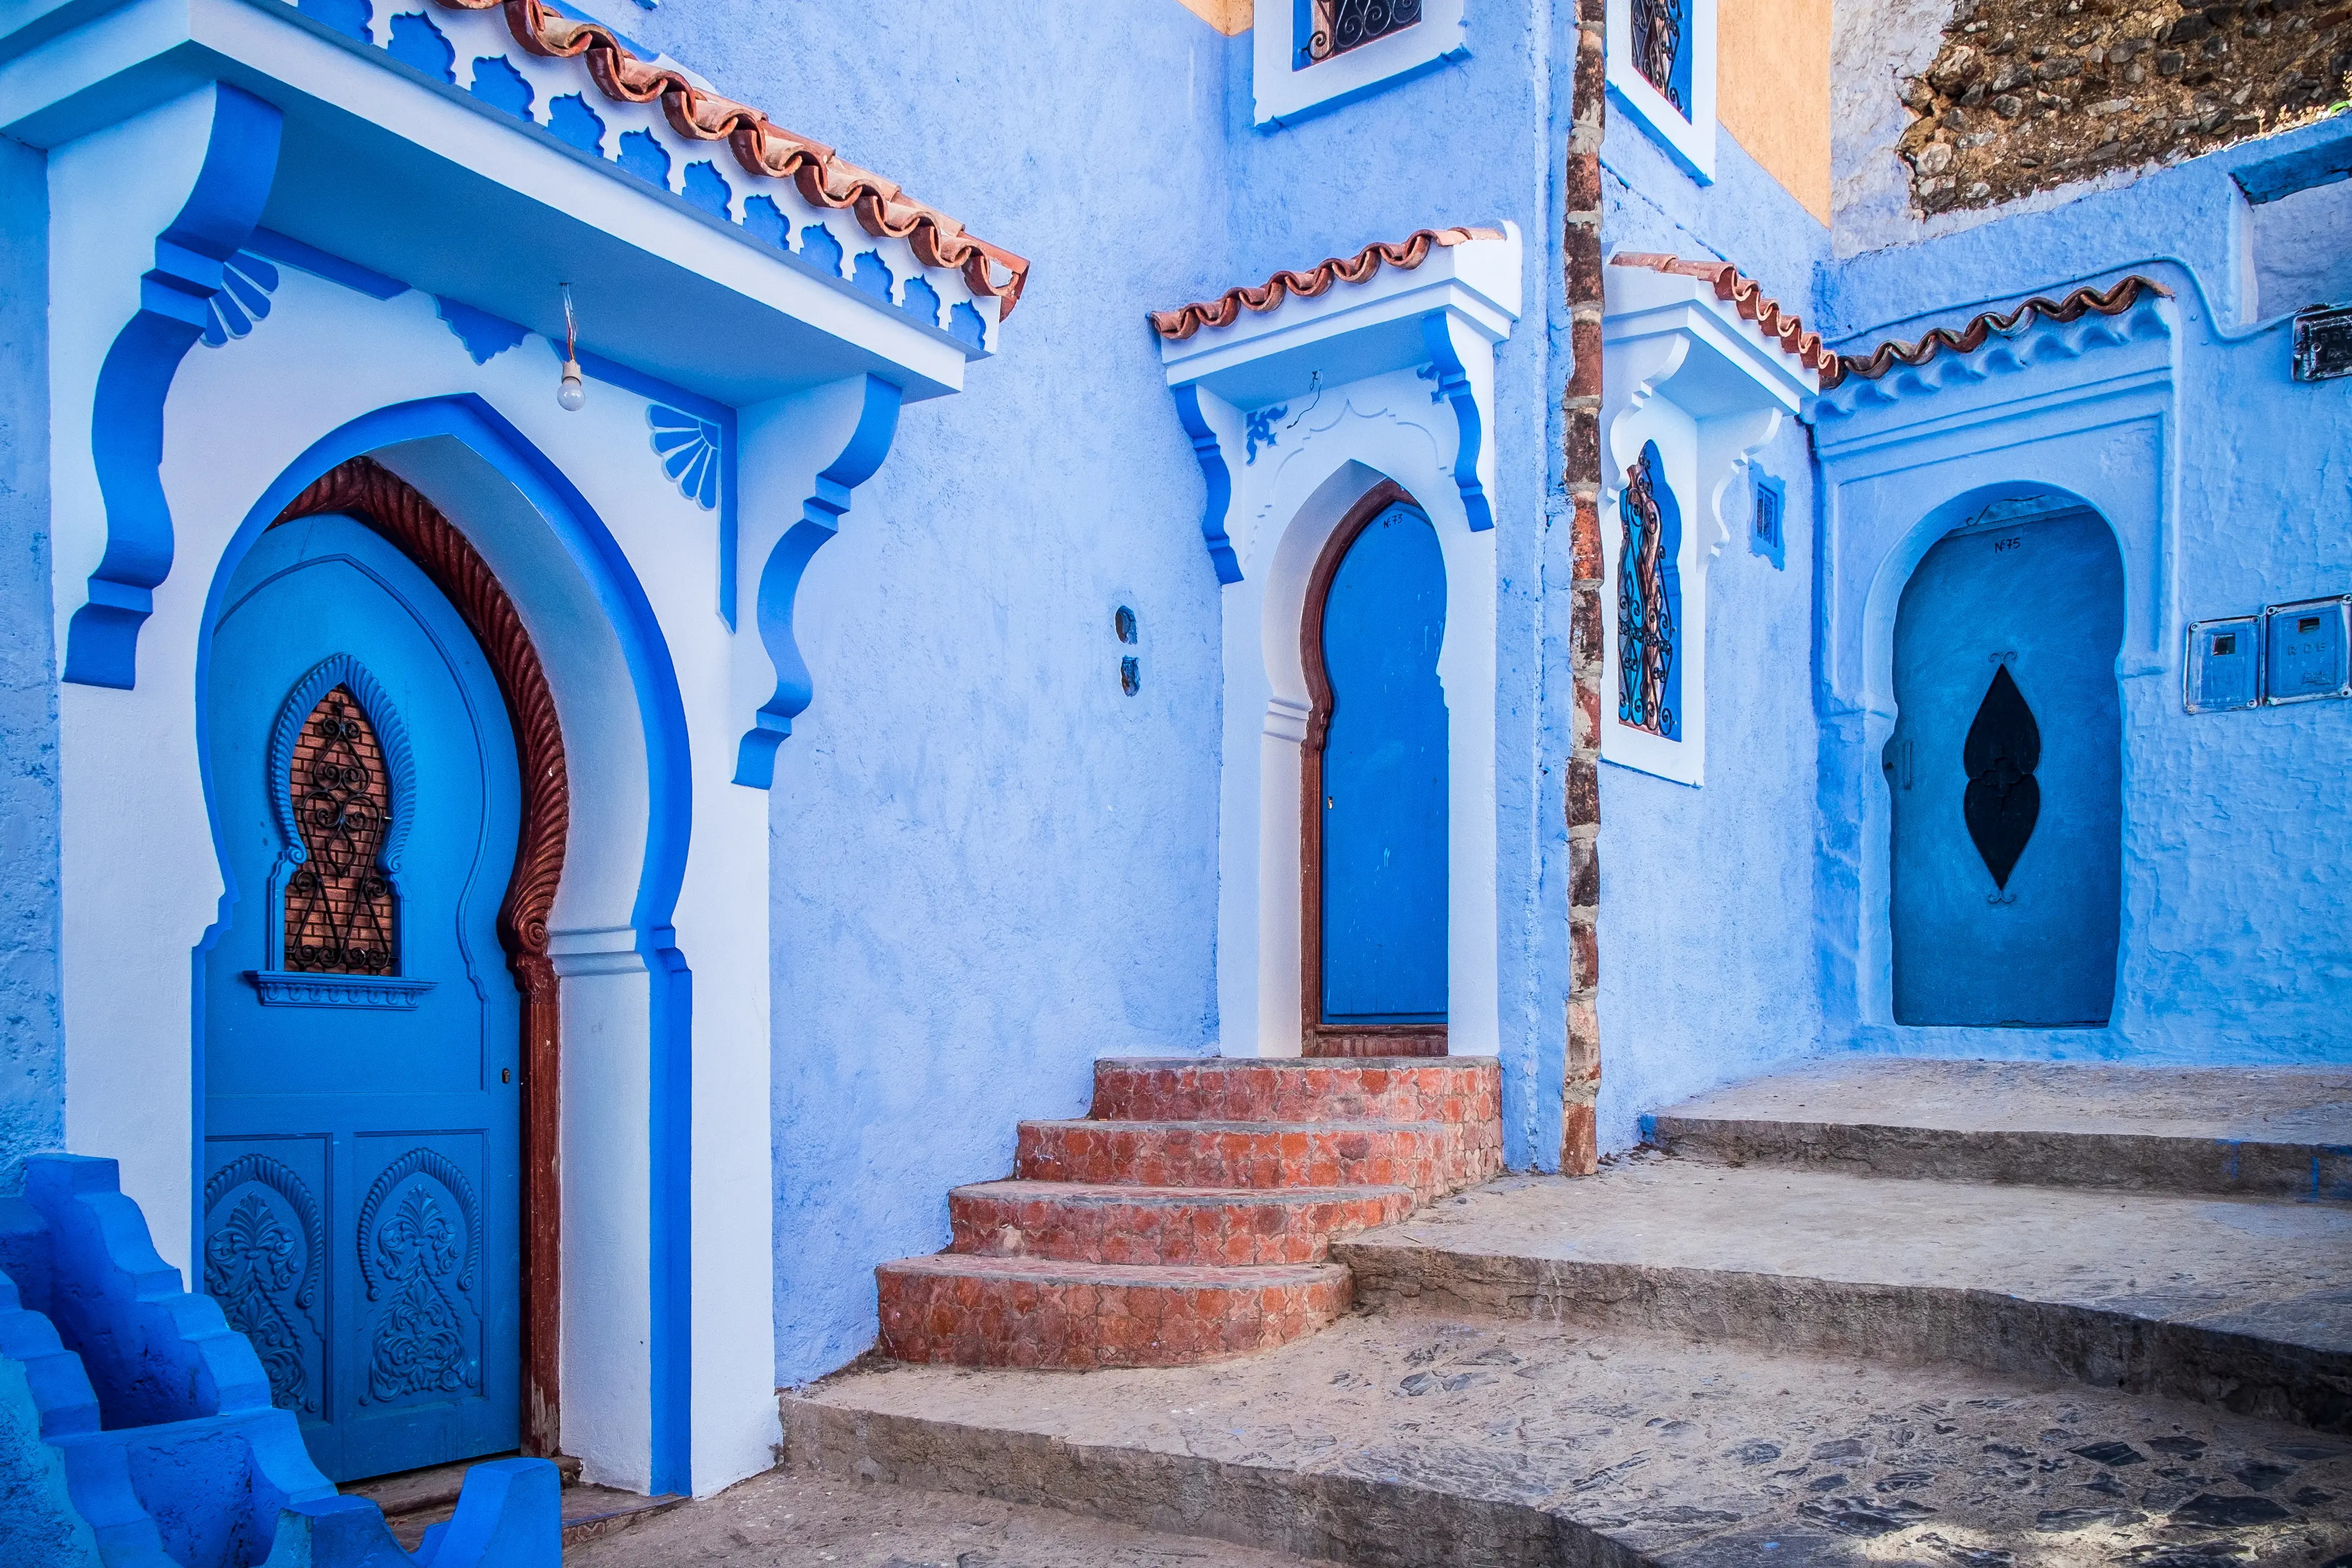 2-Day Shopping and Sightseeing Extravaganza in Chefchaouen, Morocco